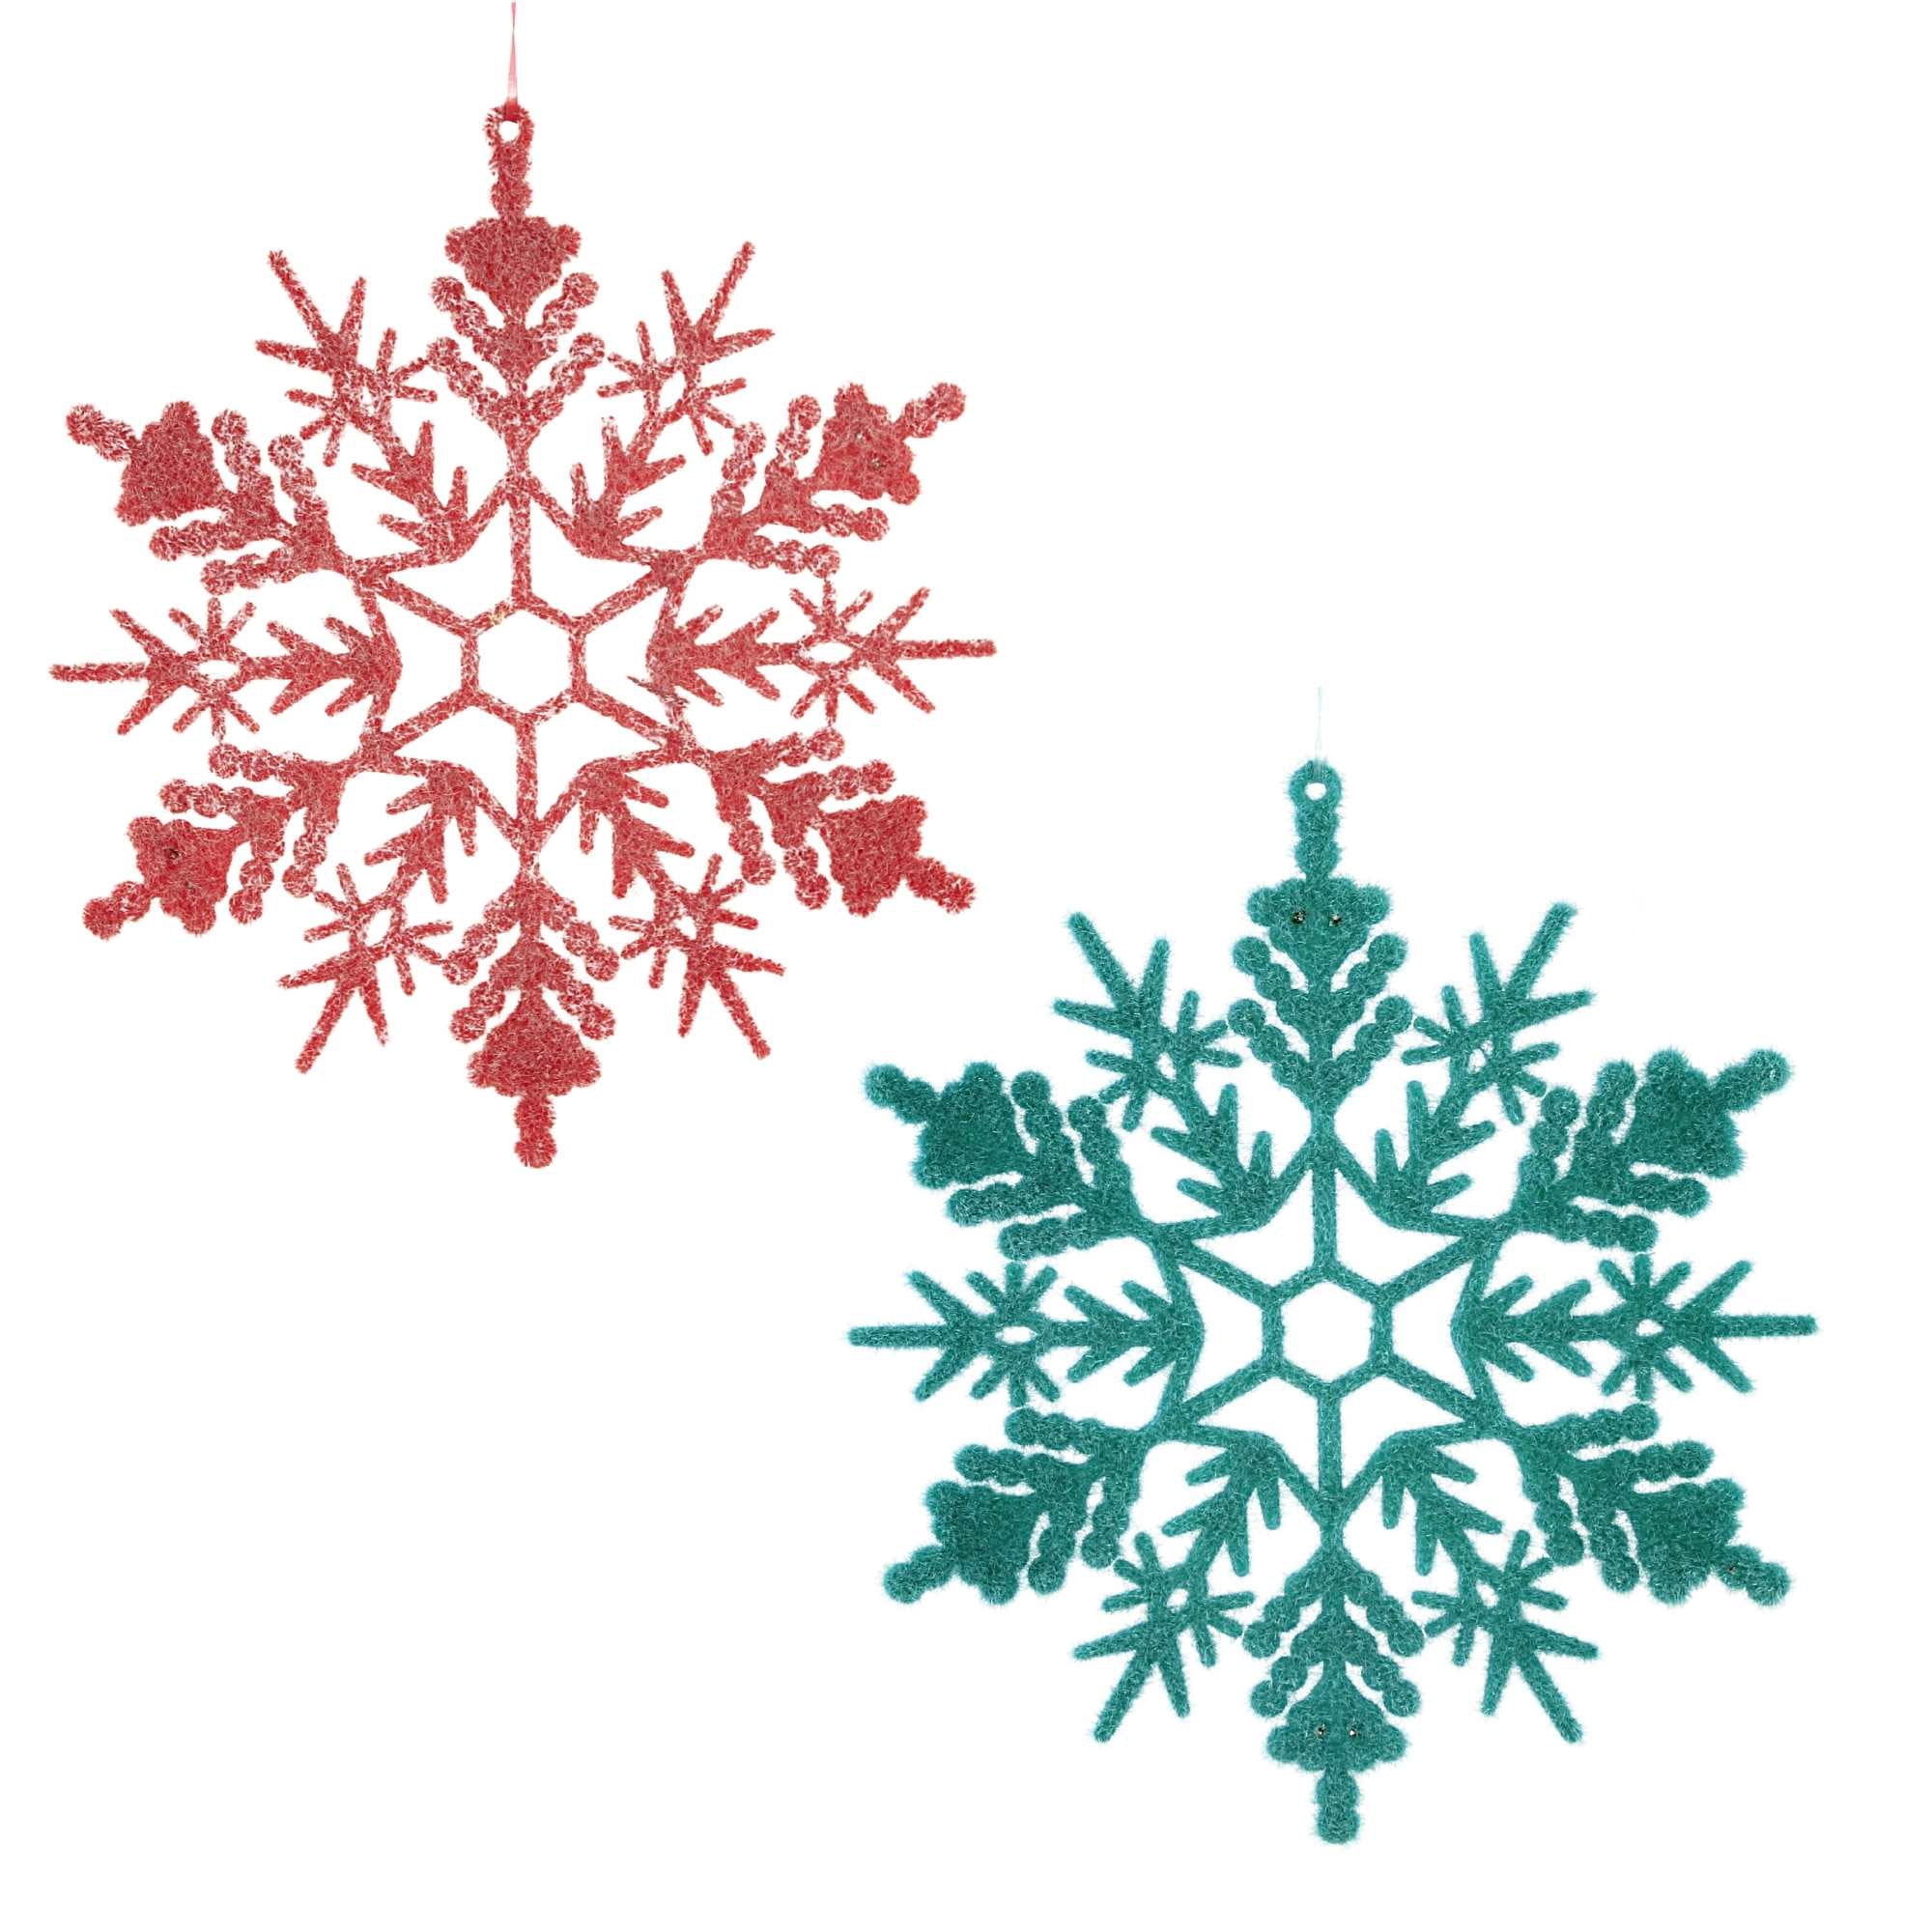 Christmas clip art: SNOW FLAKES hand painted snow flakes, 35 clip art 300  dpi PNG files (5183)